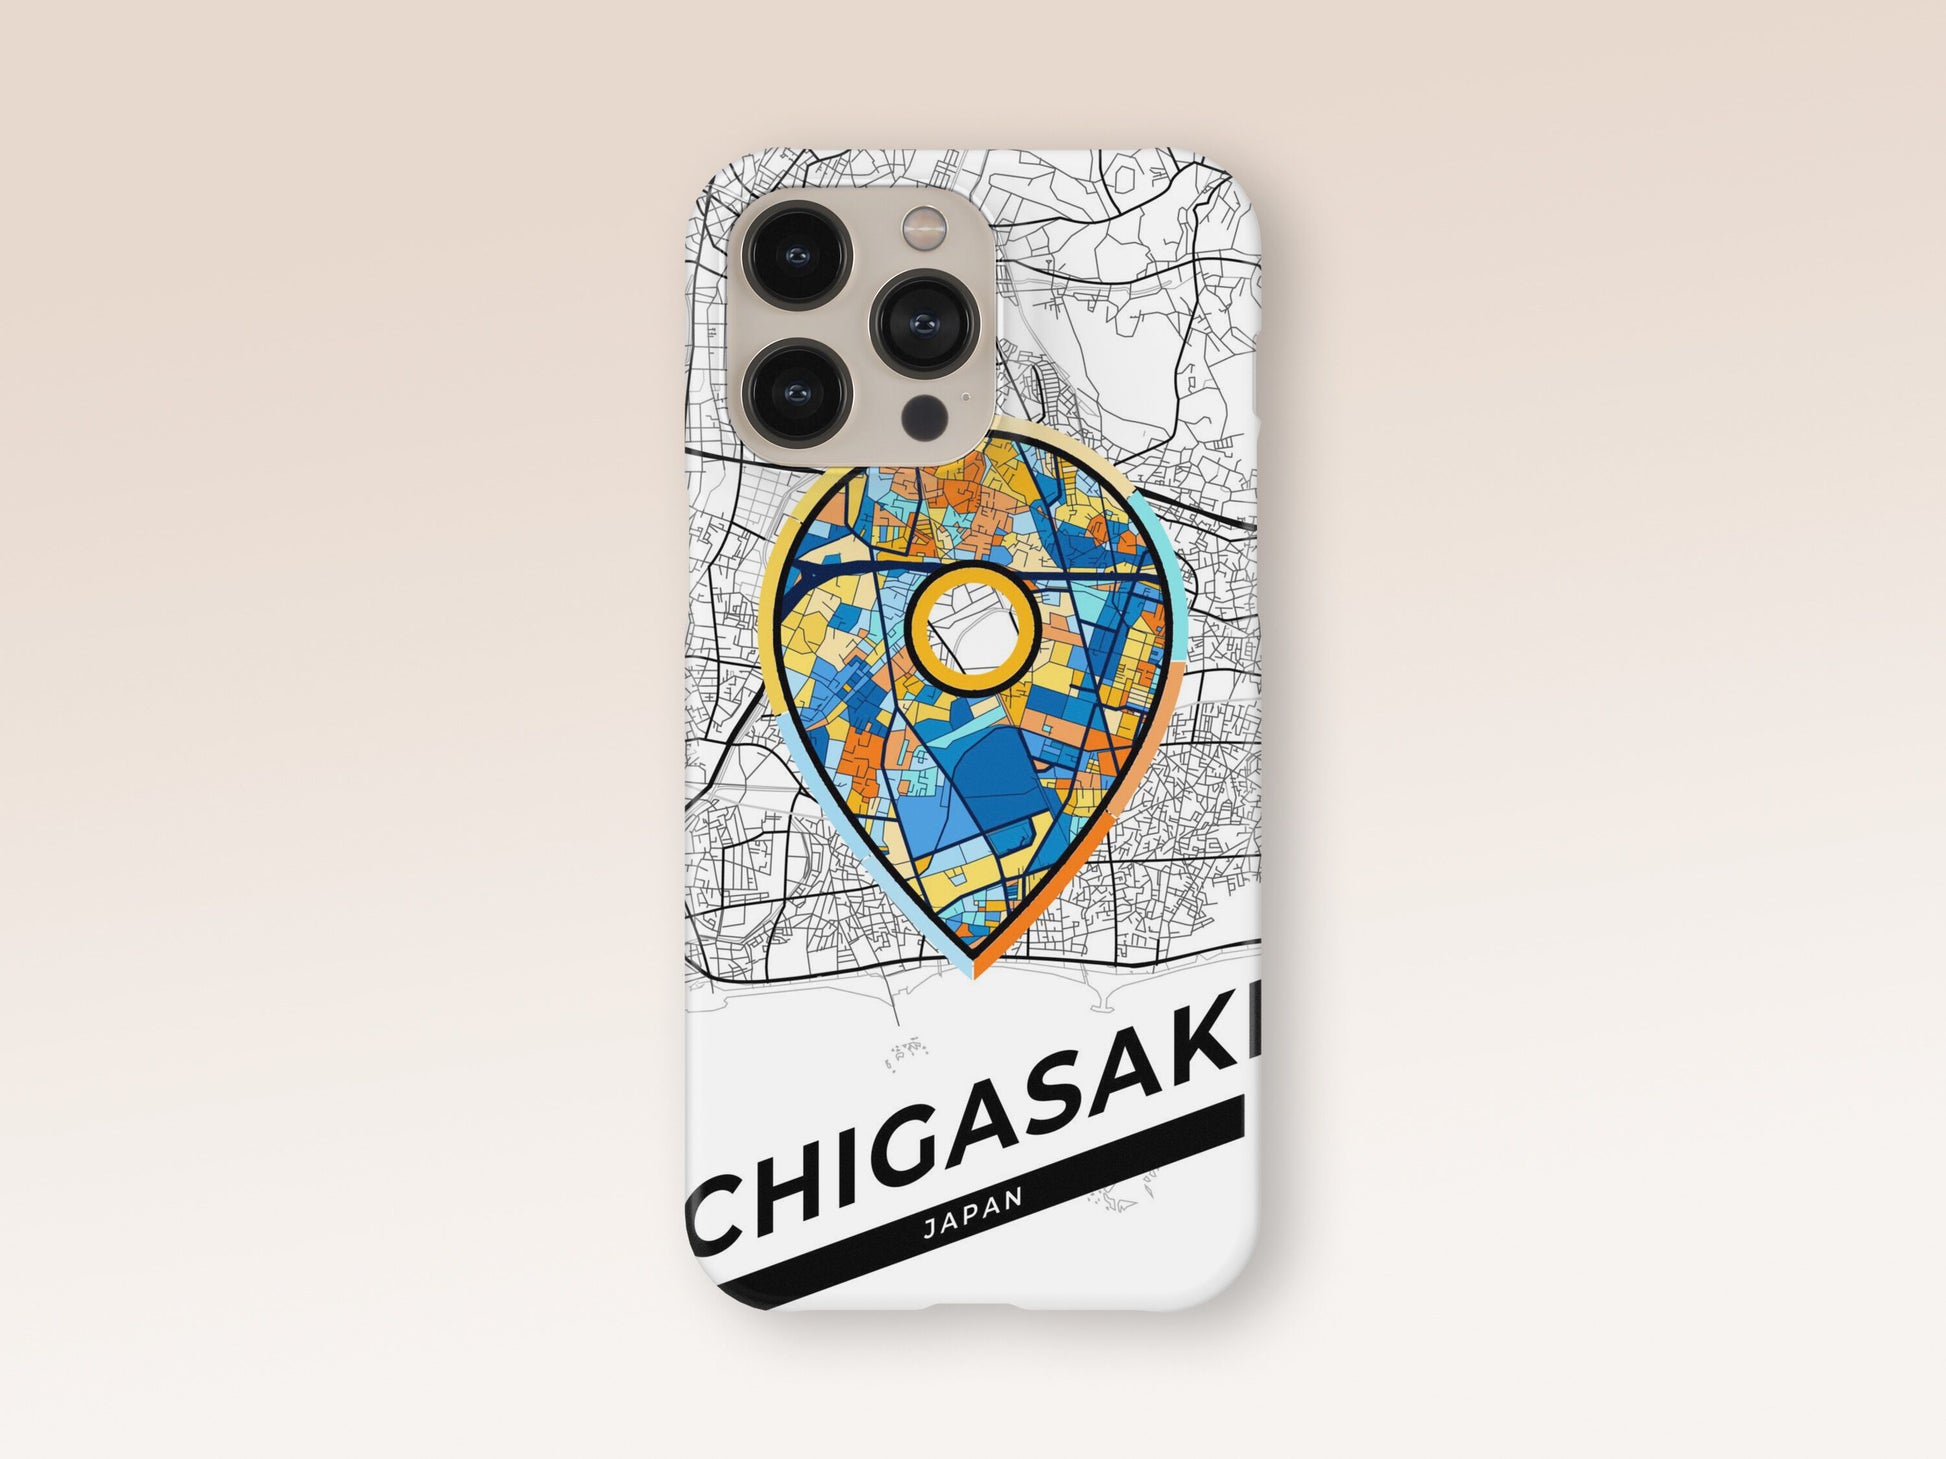 Chigasaki Japan slim phone case with colorful icon. Birthday, wedding or housewarming gift. Couple match cases. 1